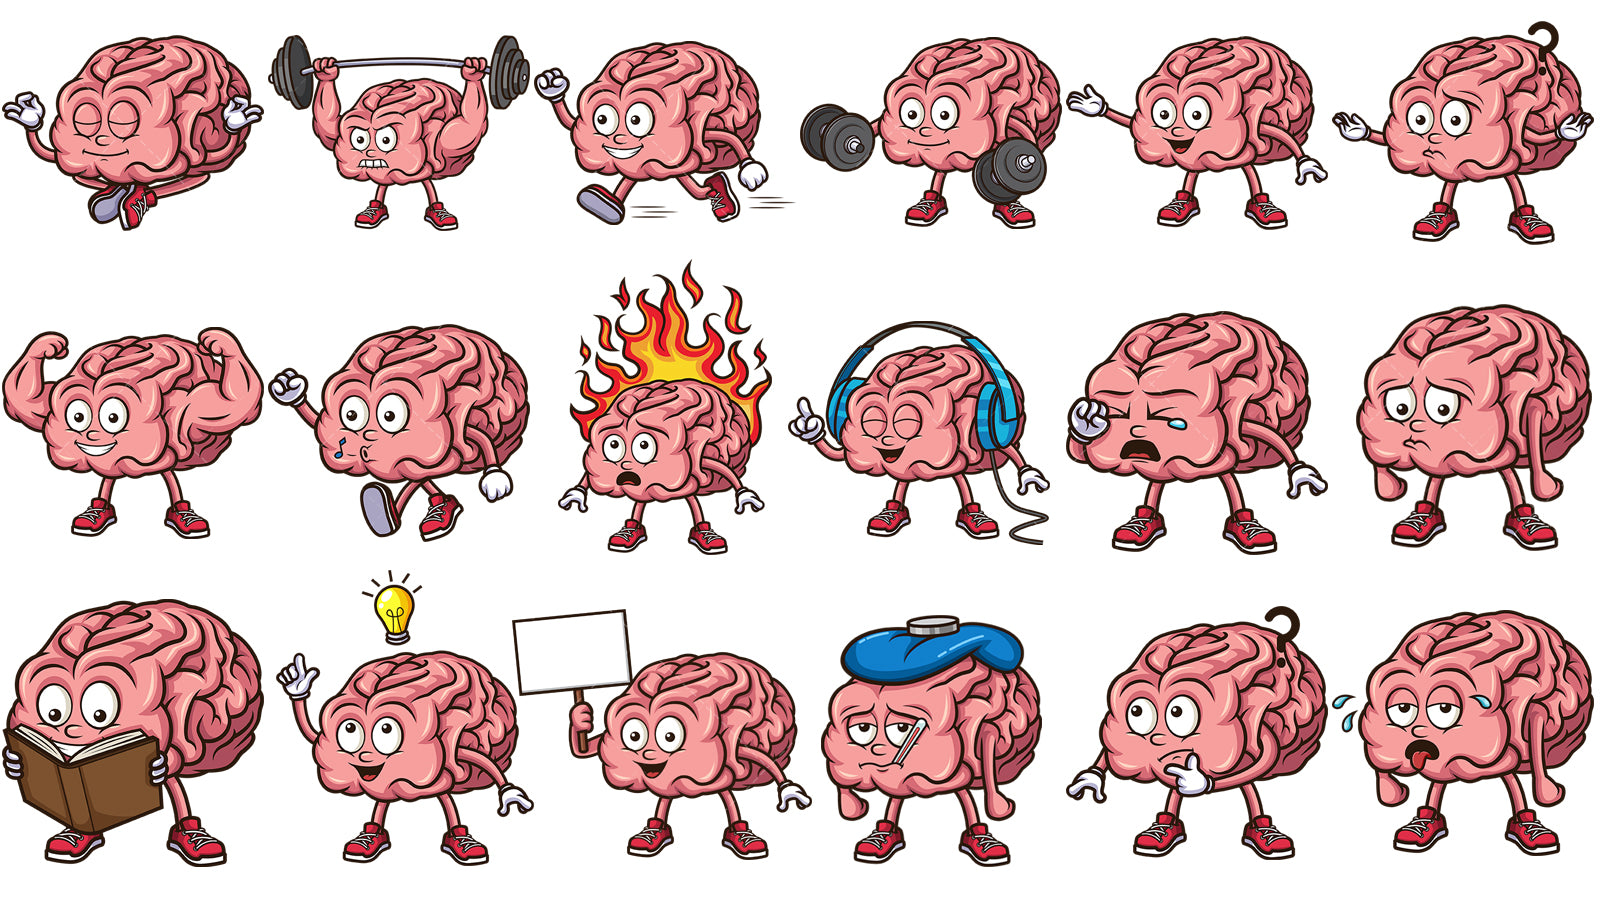 A bundle of 36 royalty-free stock vector illustrations of a brain mascot character.